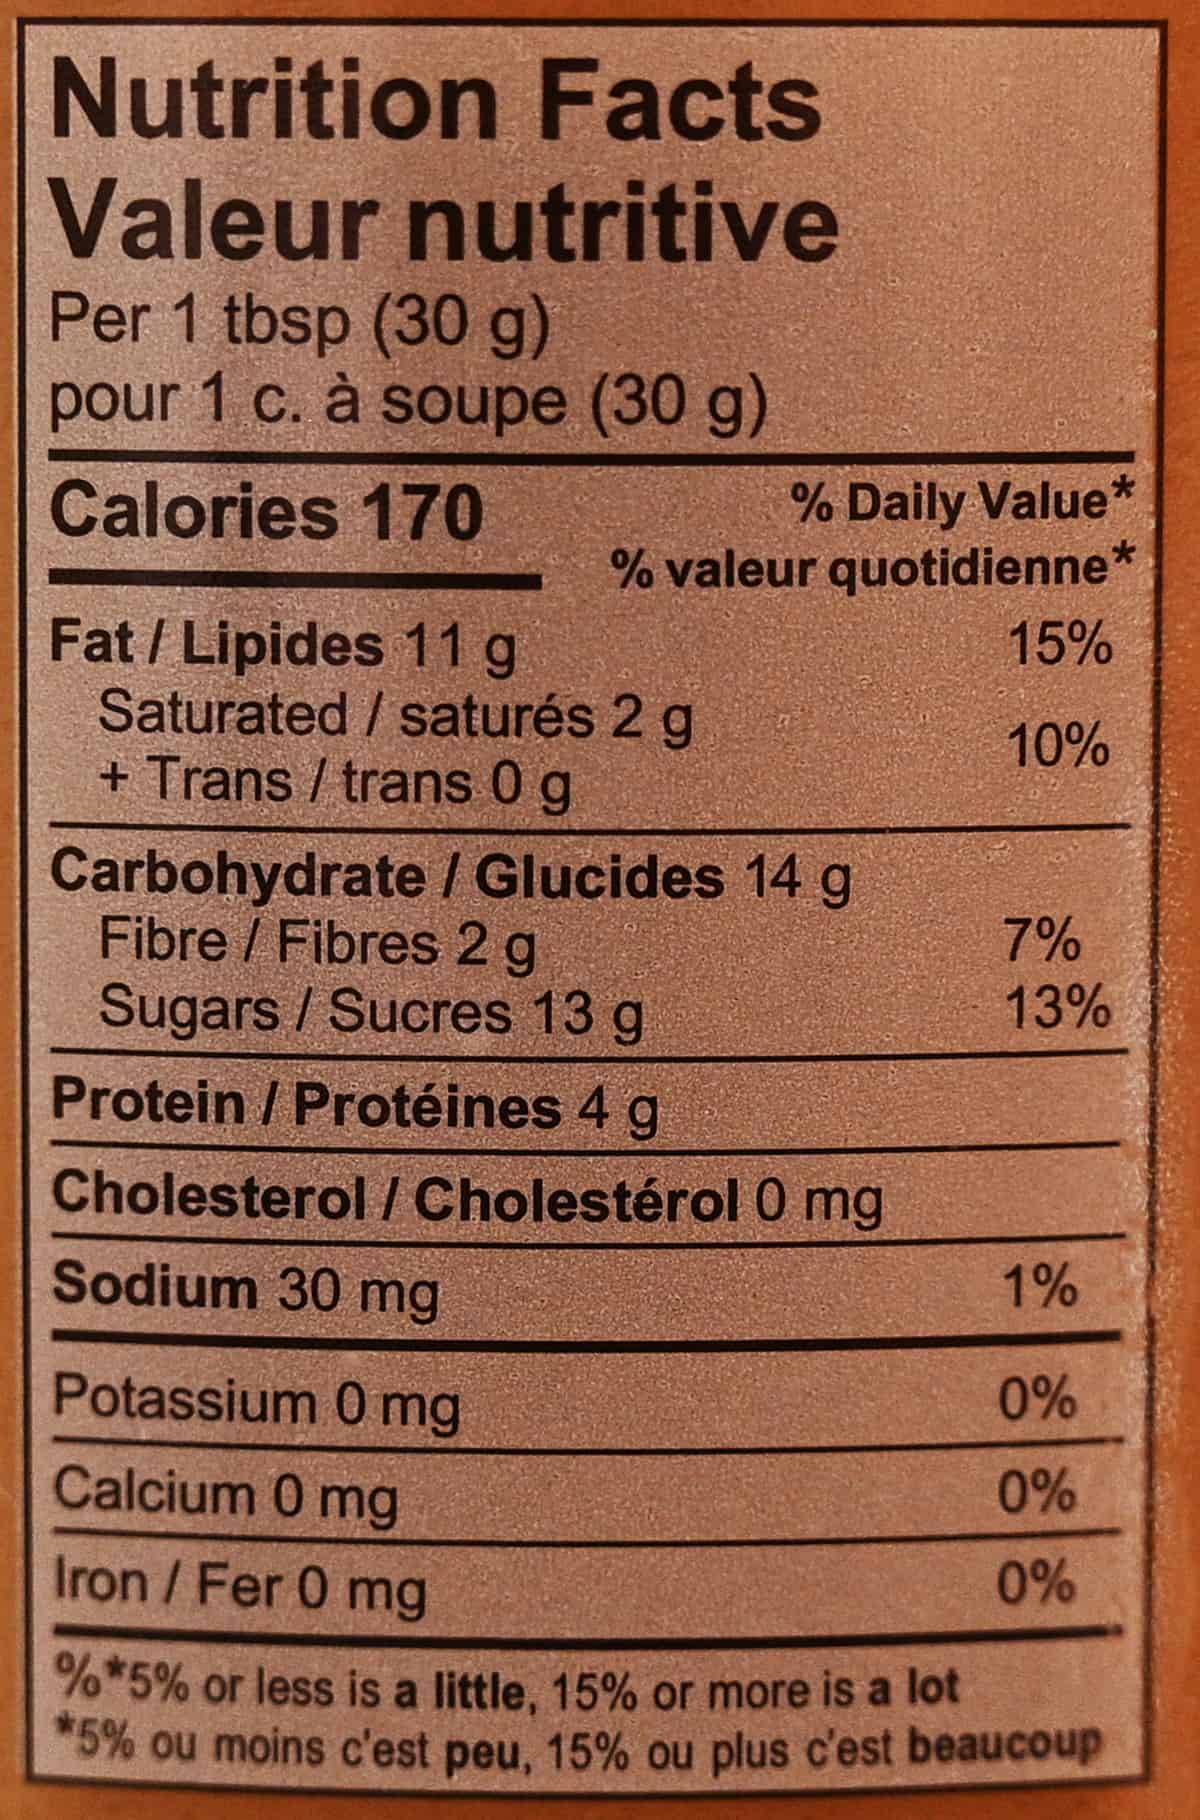 Image of the nutrition facts for the almond cream from the back of the jar.